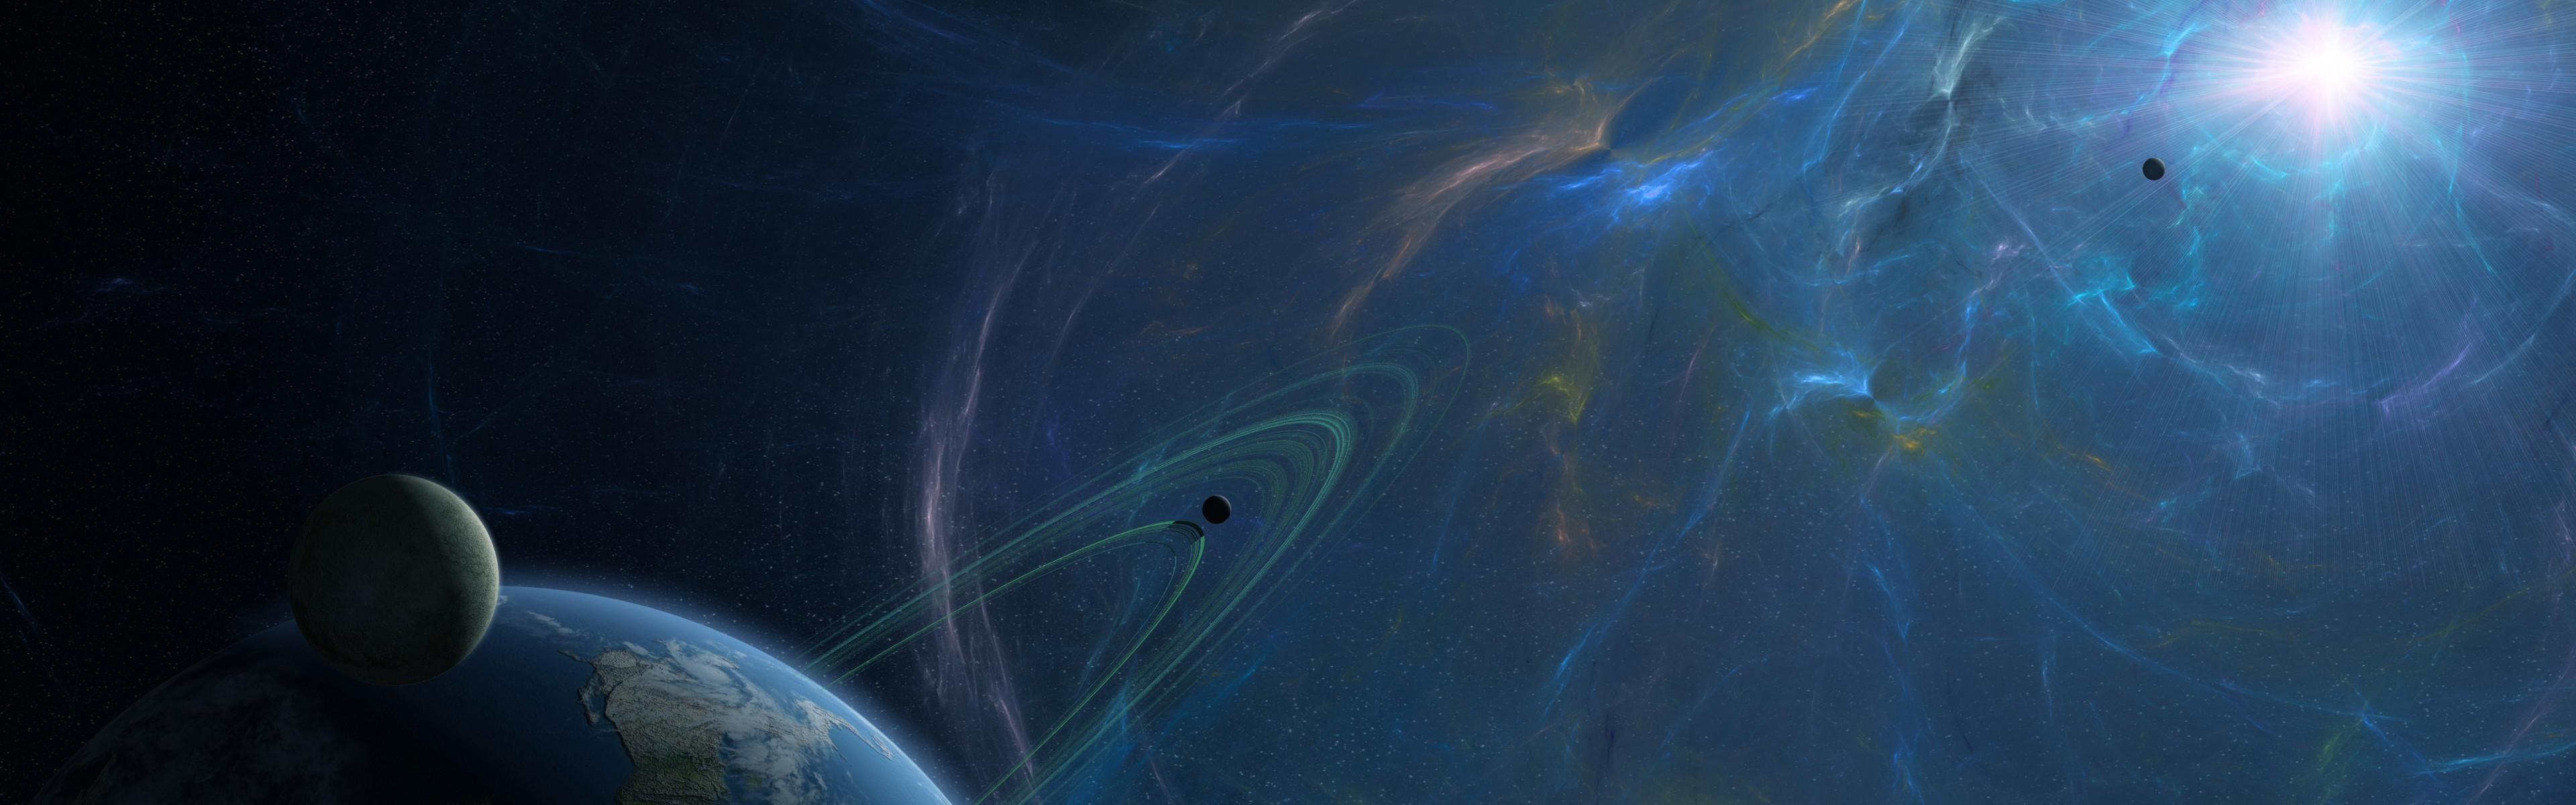 3840x1200 ... Fantasy-blue-space-iphone-panoramic-wallpaper-tech_touch_ru